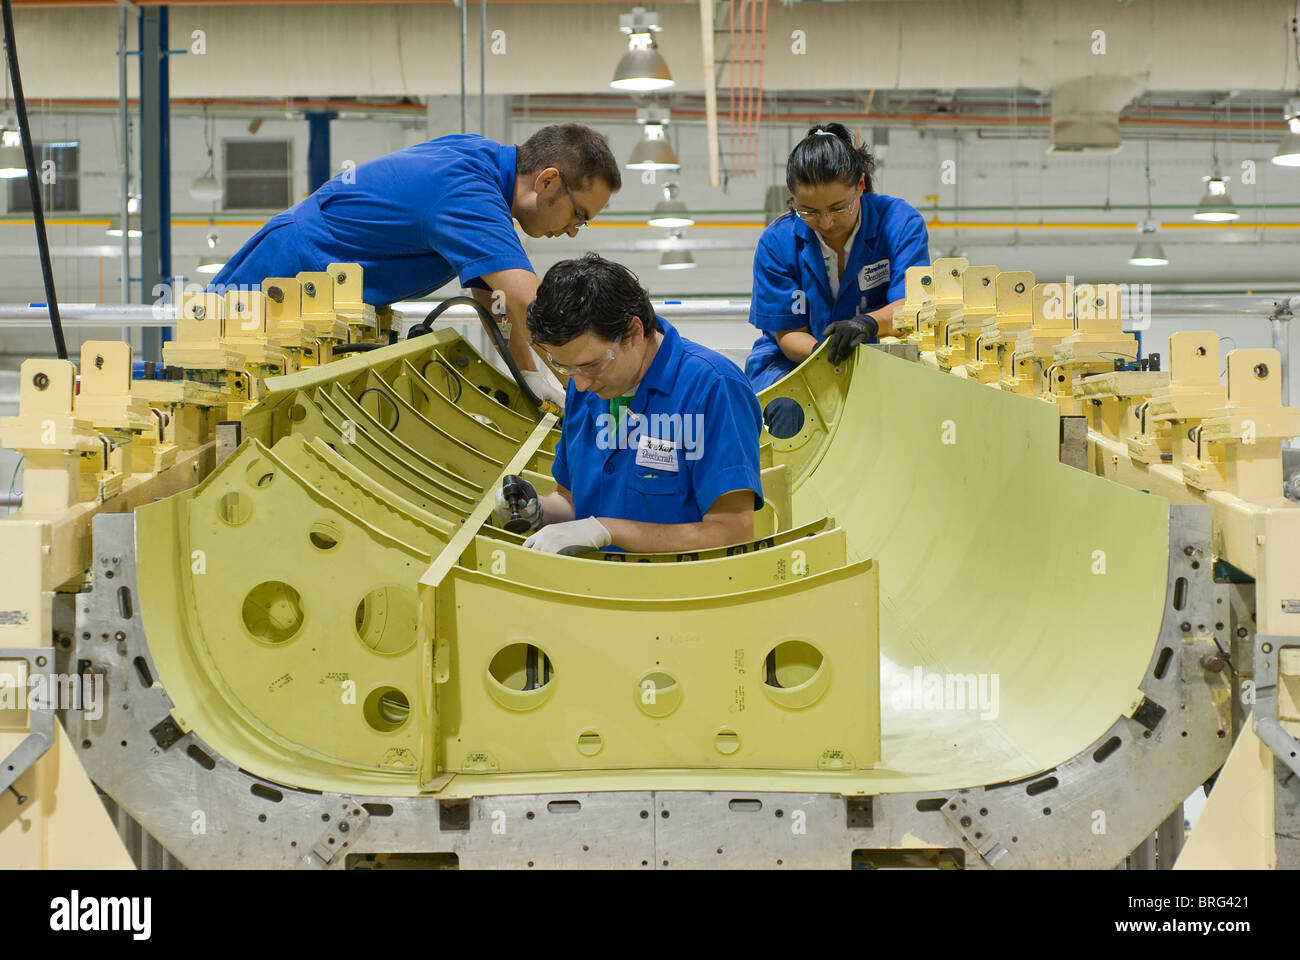 Workers at the Hawker Beechcraft aerospace plant in Chihuahua, Mexico construct jet airplane parts for export to the USA. Stock Photo